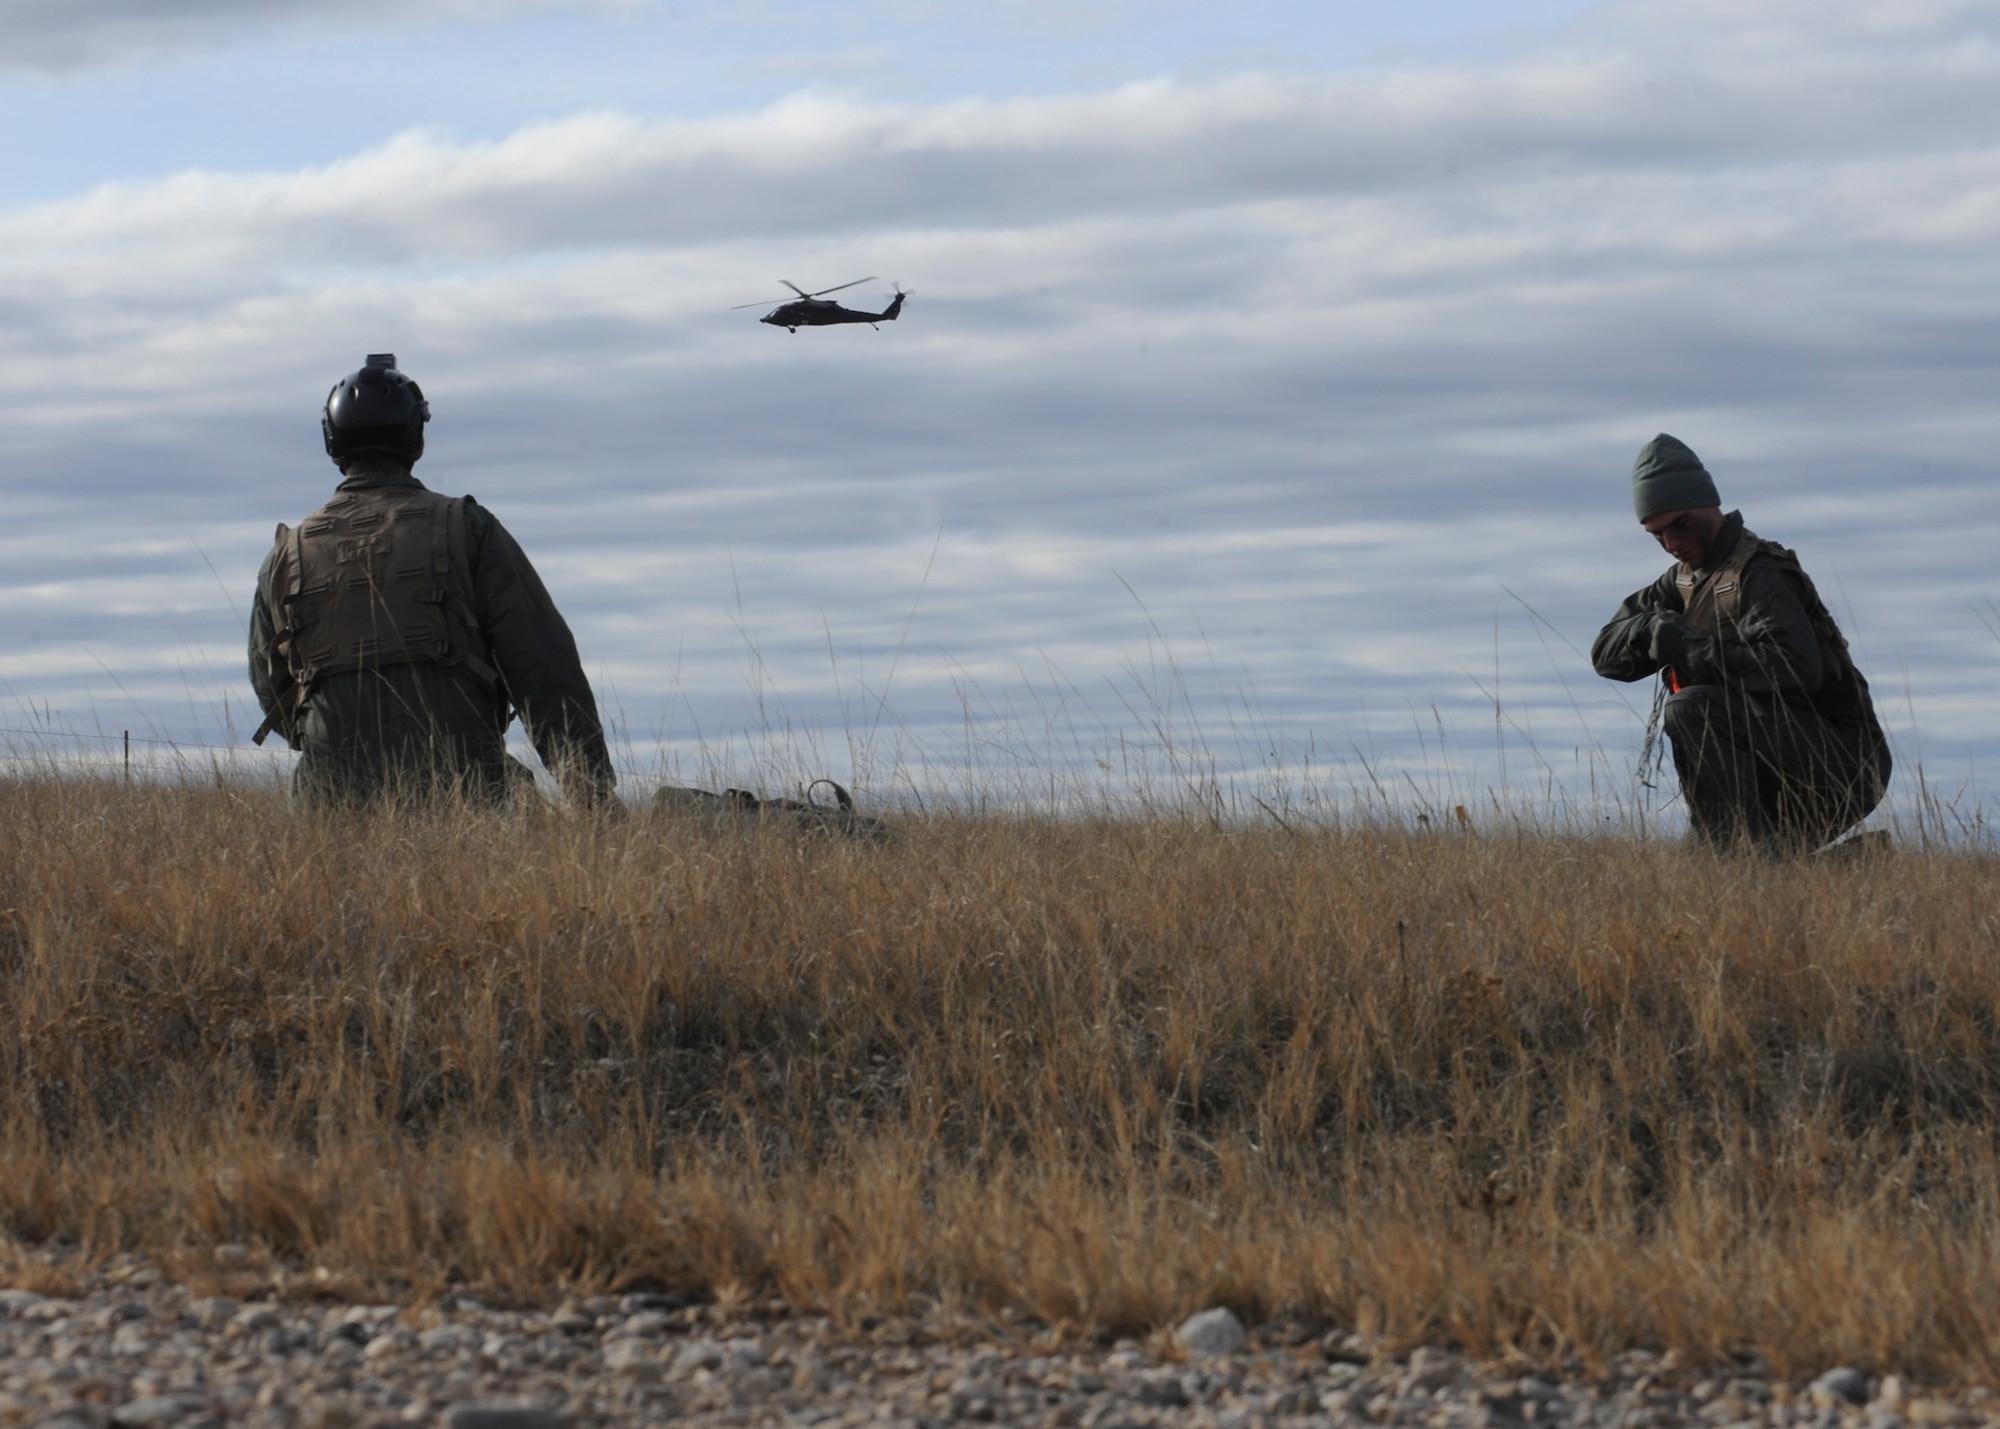 Aviators from the 28th Bomb Wing, await rescue during a joint training exercise at the Powder River Training Complex, Belle Fourche, S.D. Nov. 16, 2016. The training exercise simulated rescuing two injured service members in an urban contested environment. (U.S. Air Force photo by Senior Airman Anania Tekurio/Released)